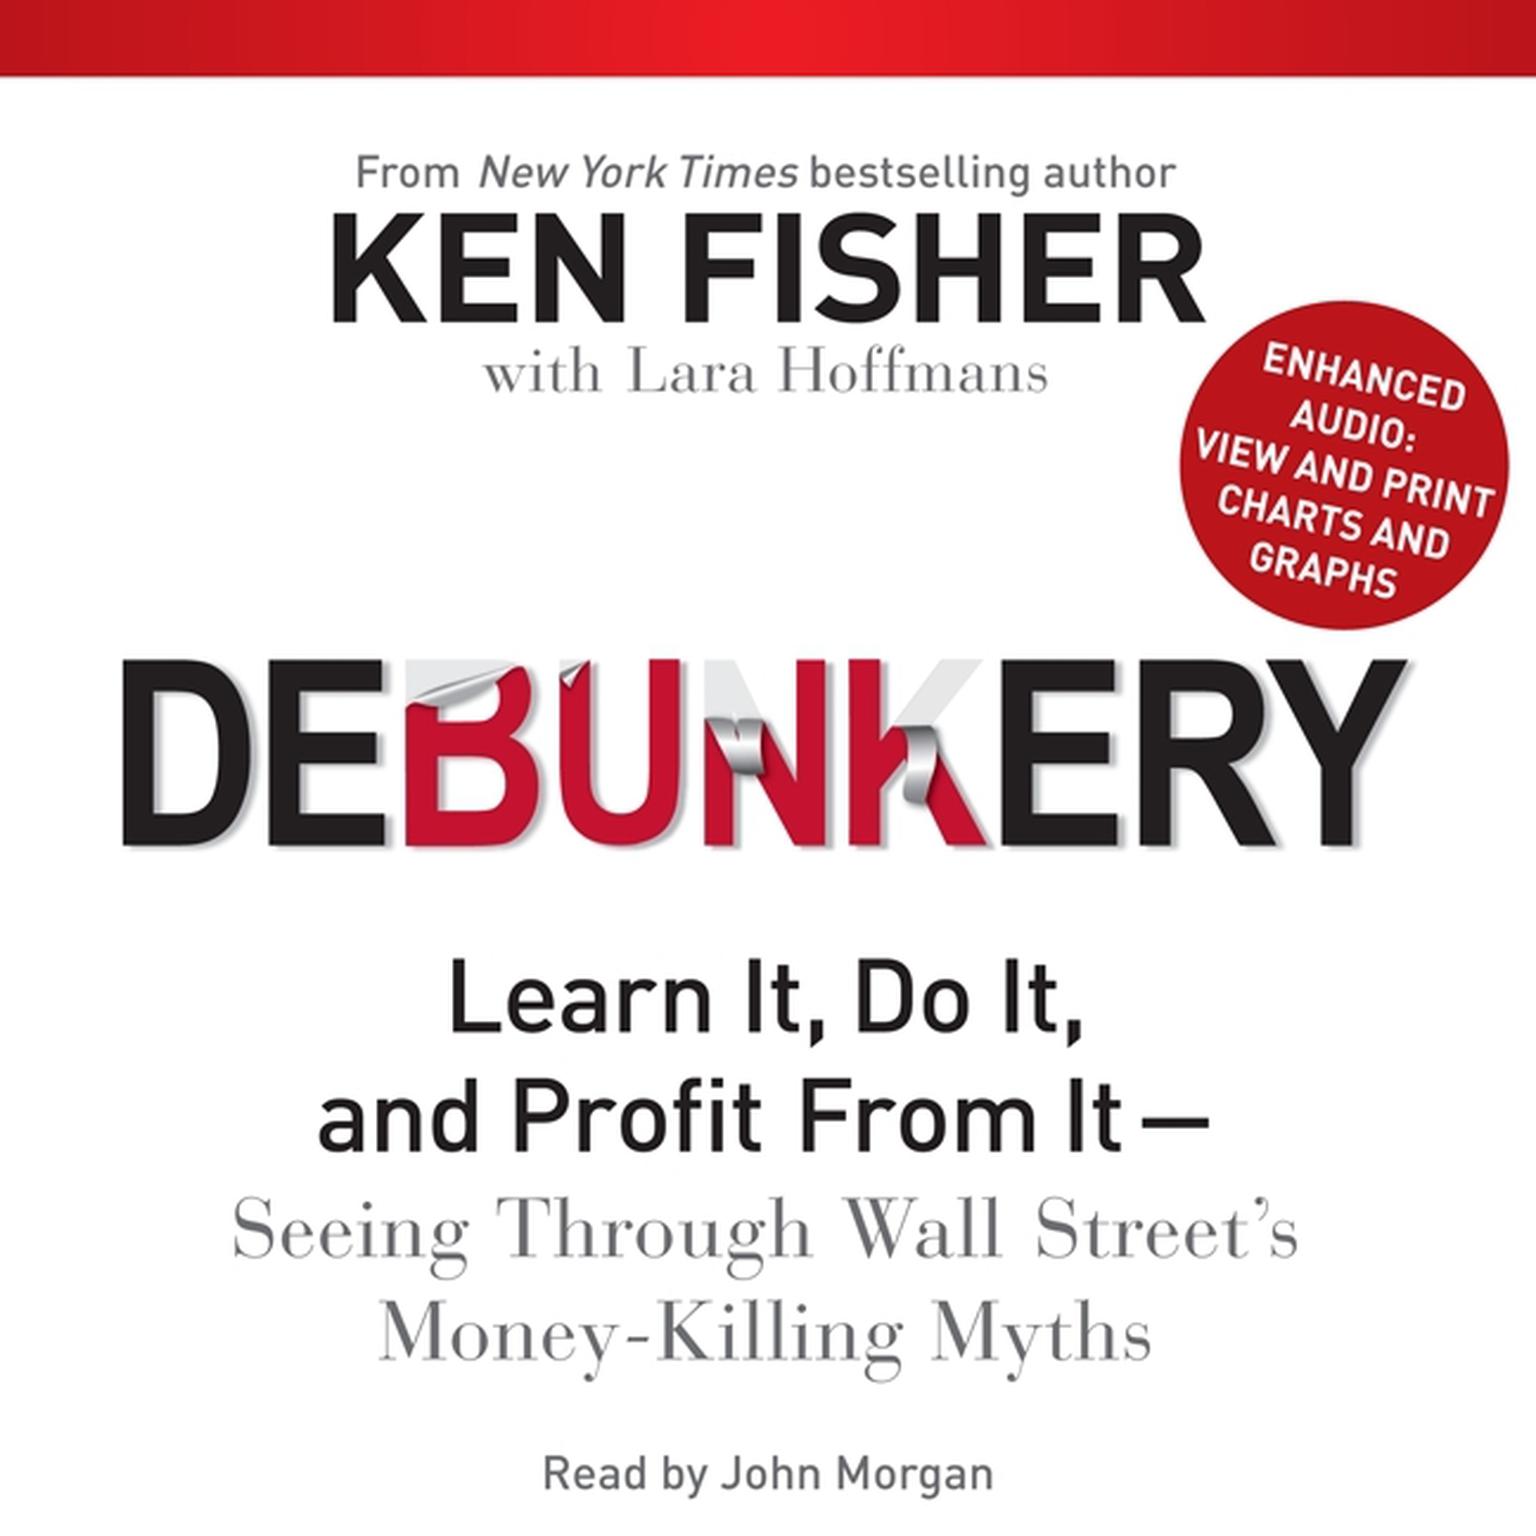 Debunkery: Learn It, Do It, and Profit from It—Seeing through Wall Street’s Money-Killing Myths Audiobook, by Ken Fisher